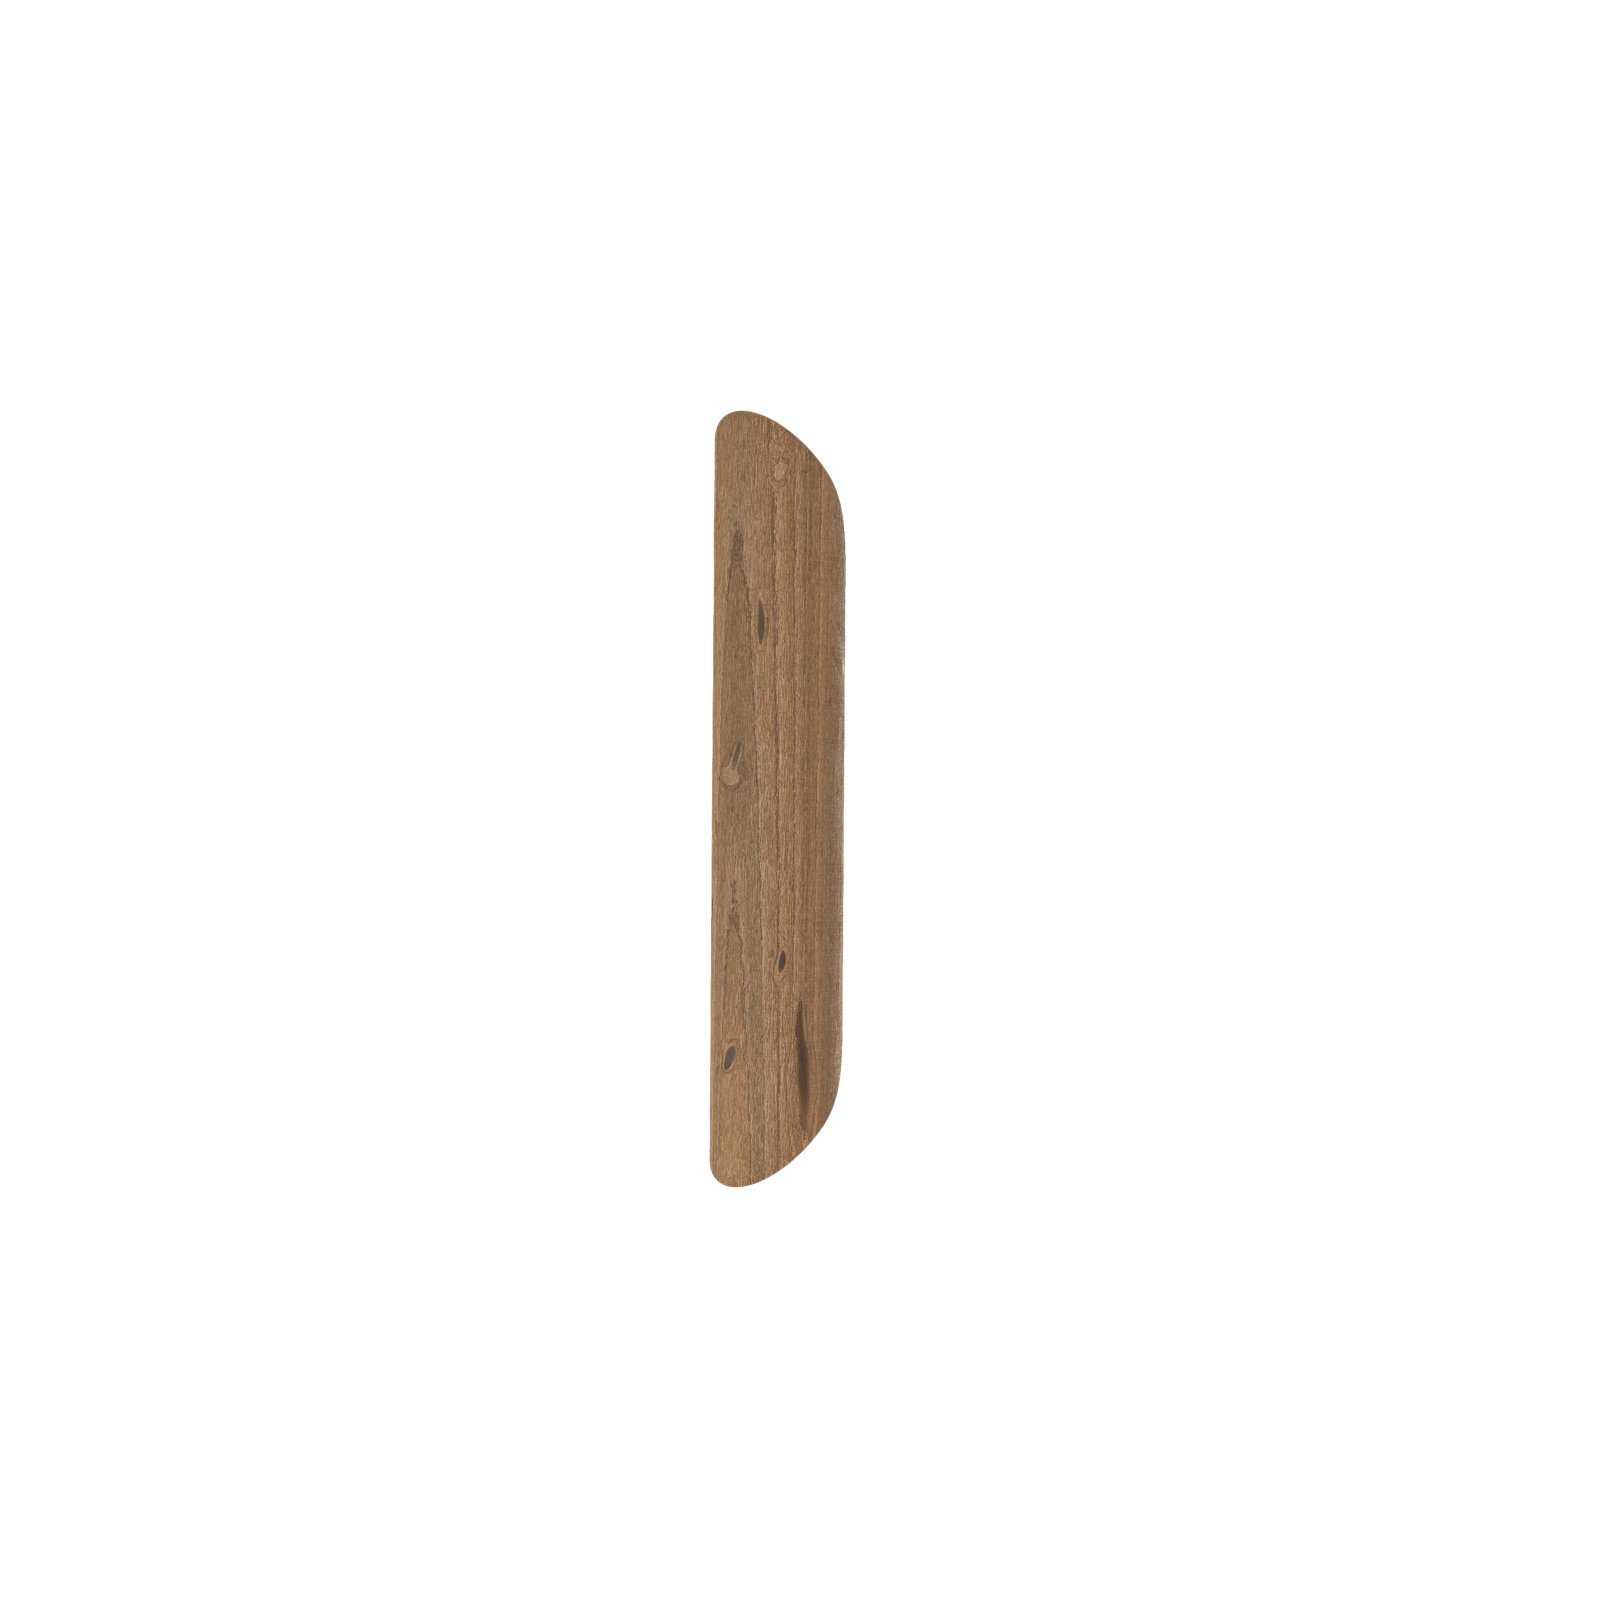 Colombia LED wall light, natural knotty oak